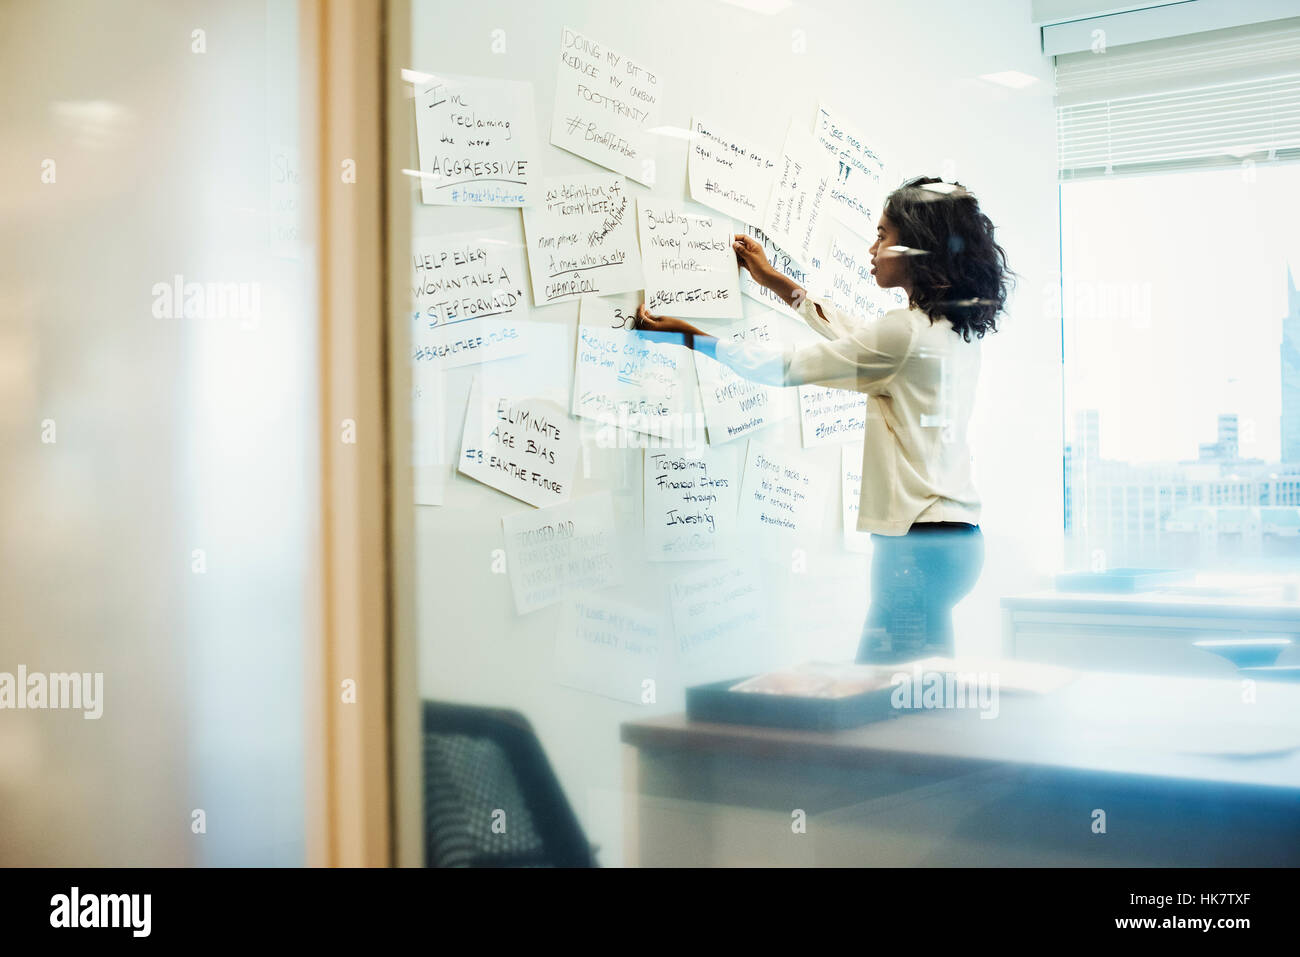 A woman standing in an office arranging pieces of paper pinned on a whiteboard. Stock Photo